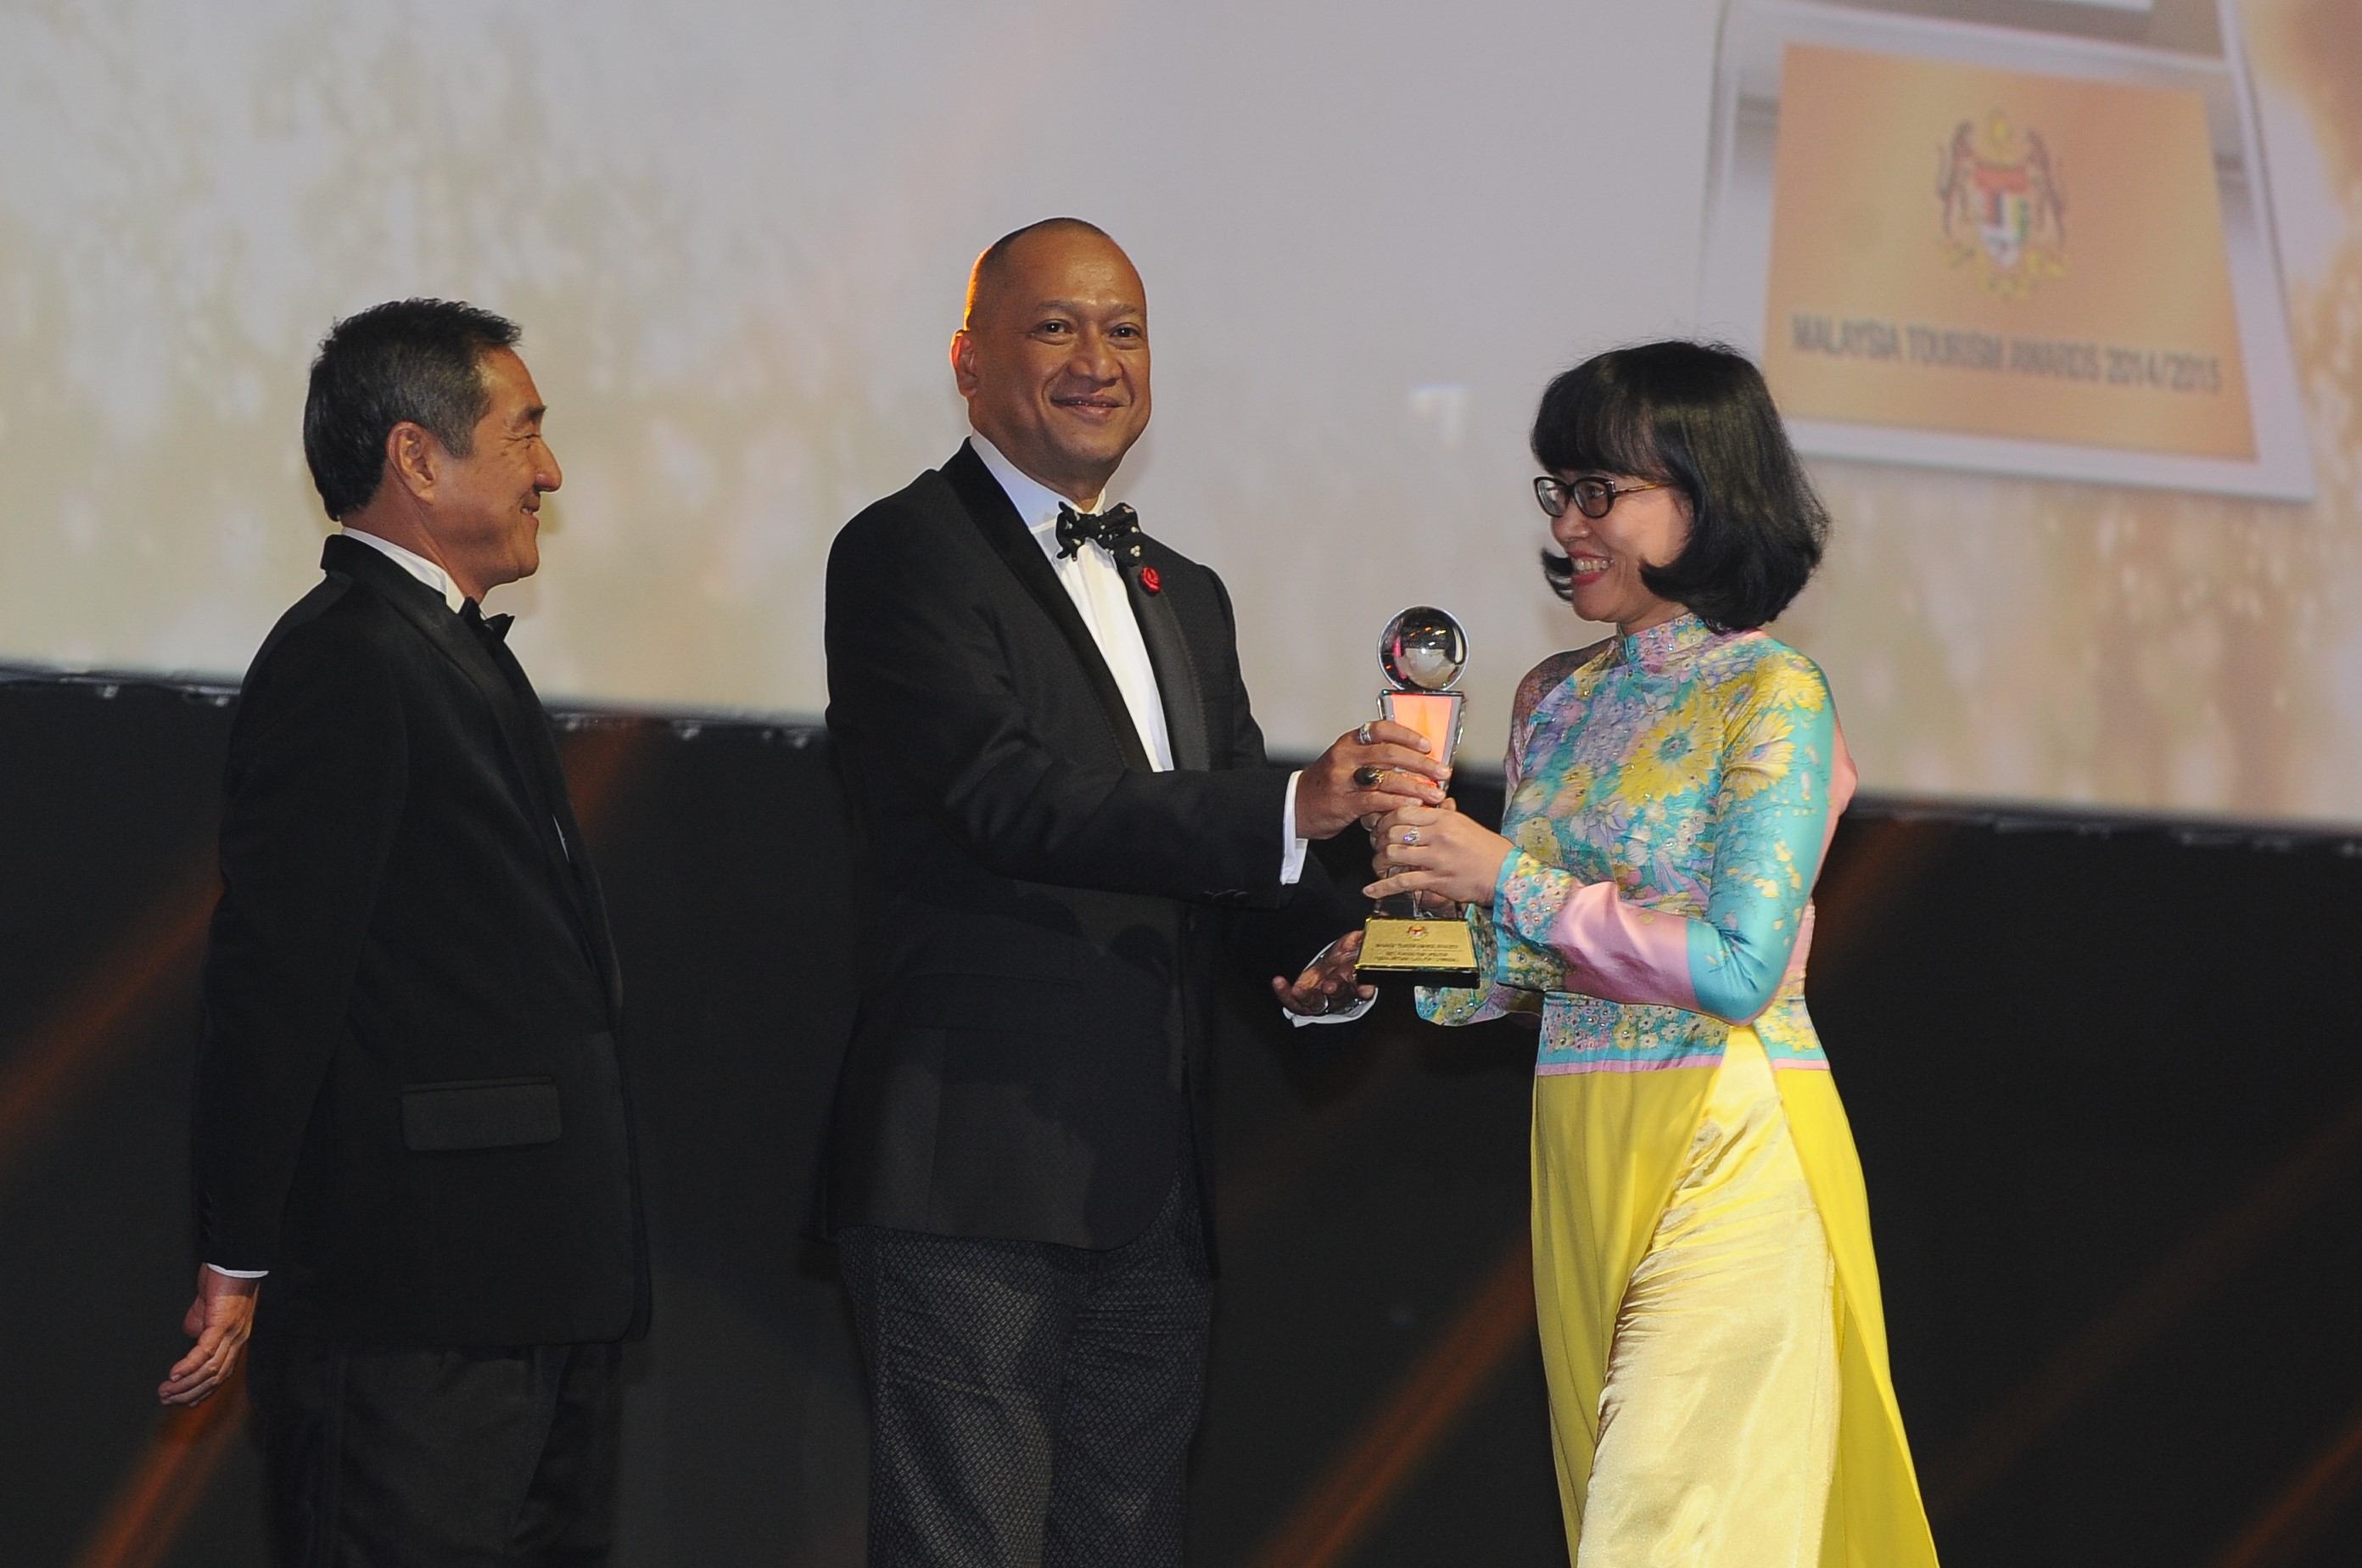 Vietnam travel firm honored as Malaysia’s best foreign tour operator